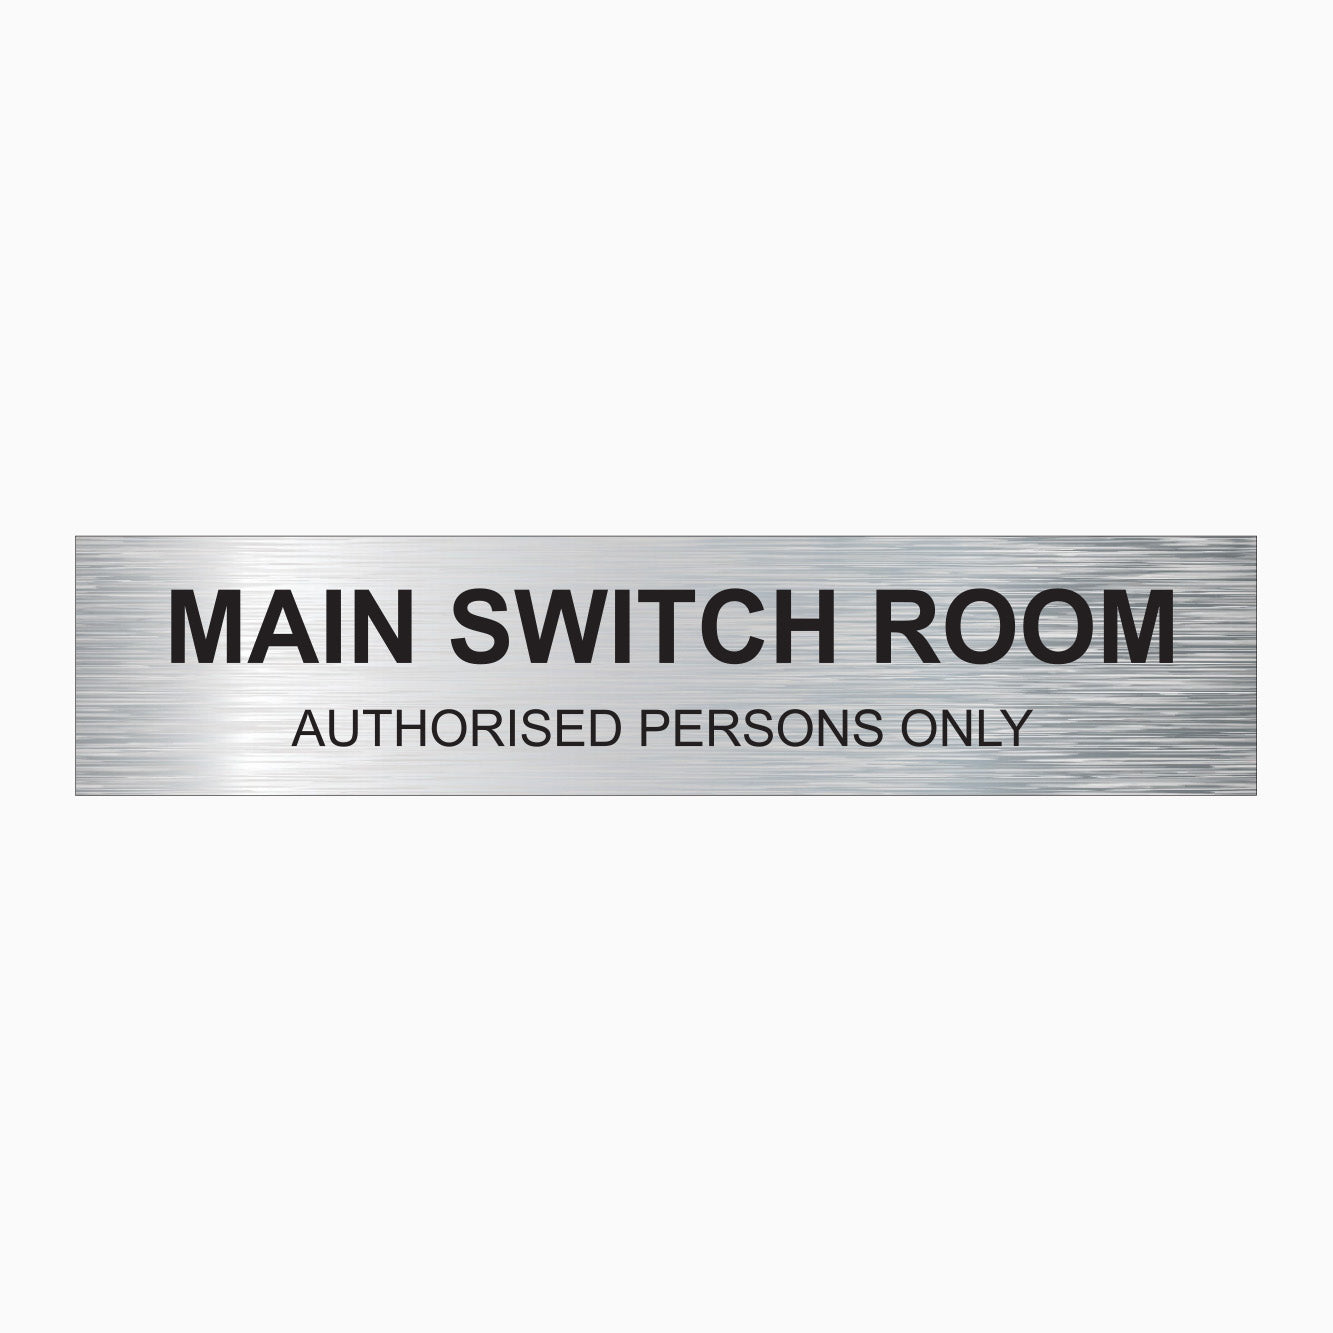 MAIN SWITCH ROOM SIGN - AUTHORISED PERSONS ONLY SIGN